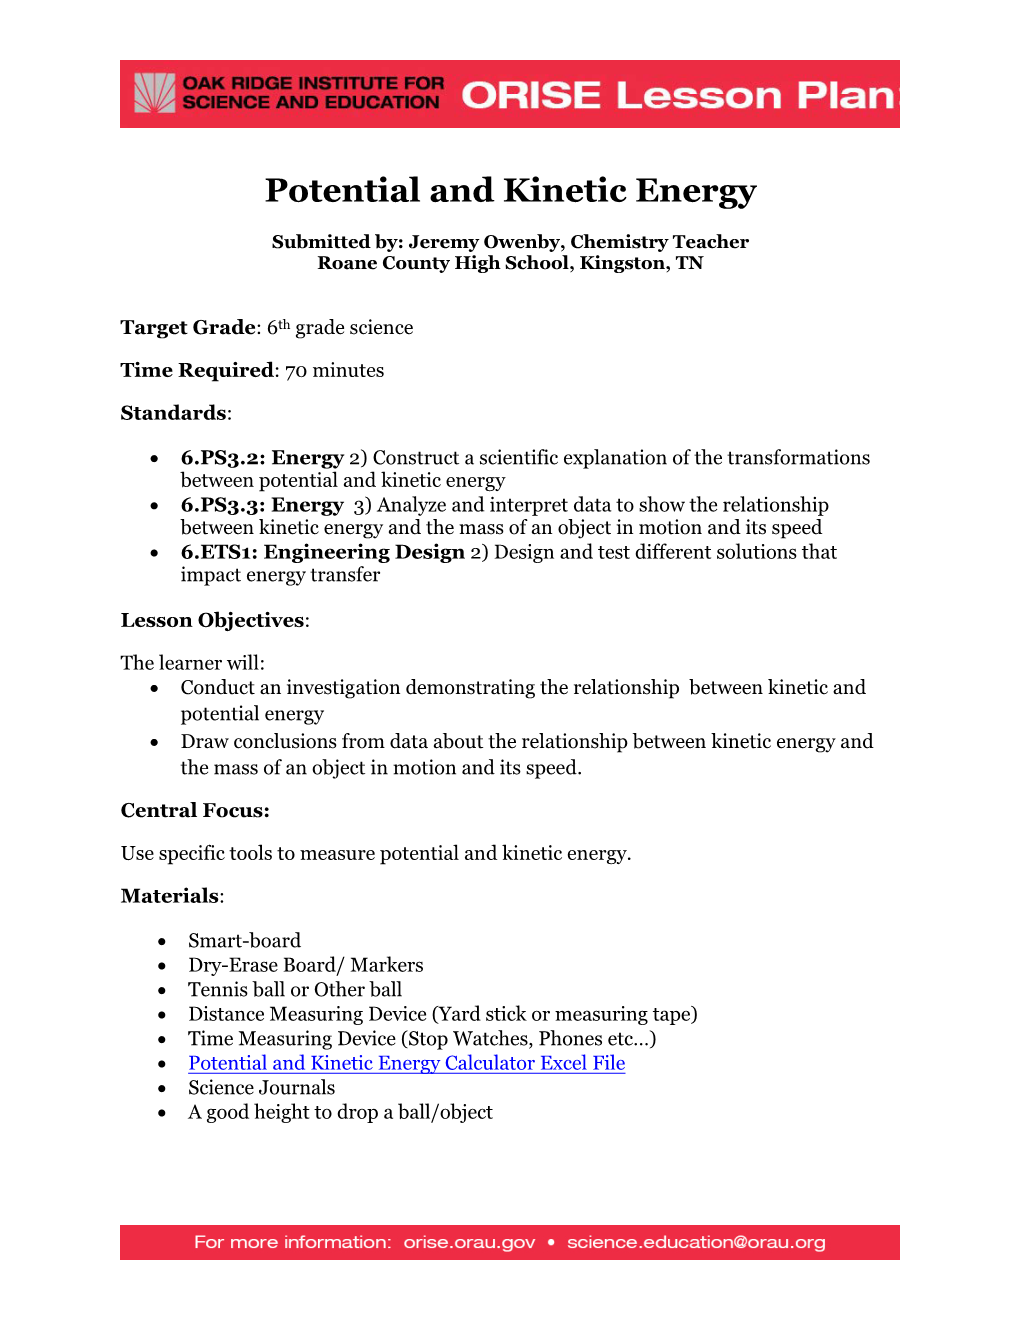 ORISE Lesson Plan: Potential and Kinetic Energy